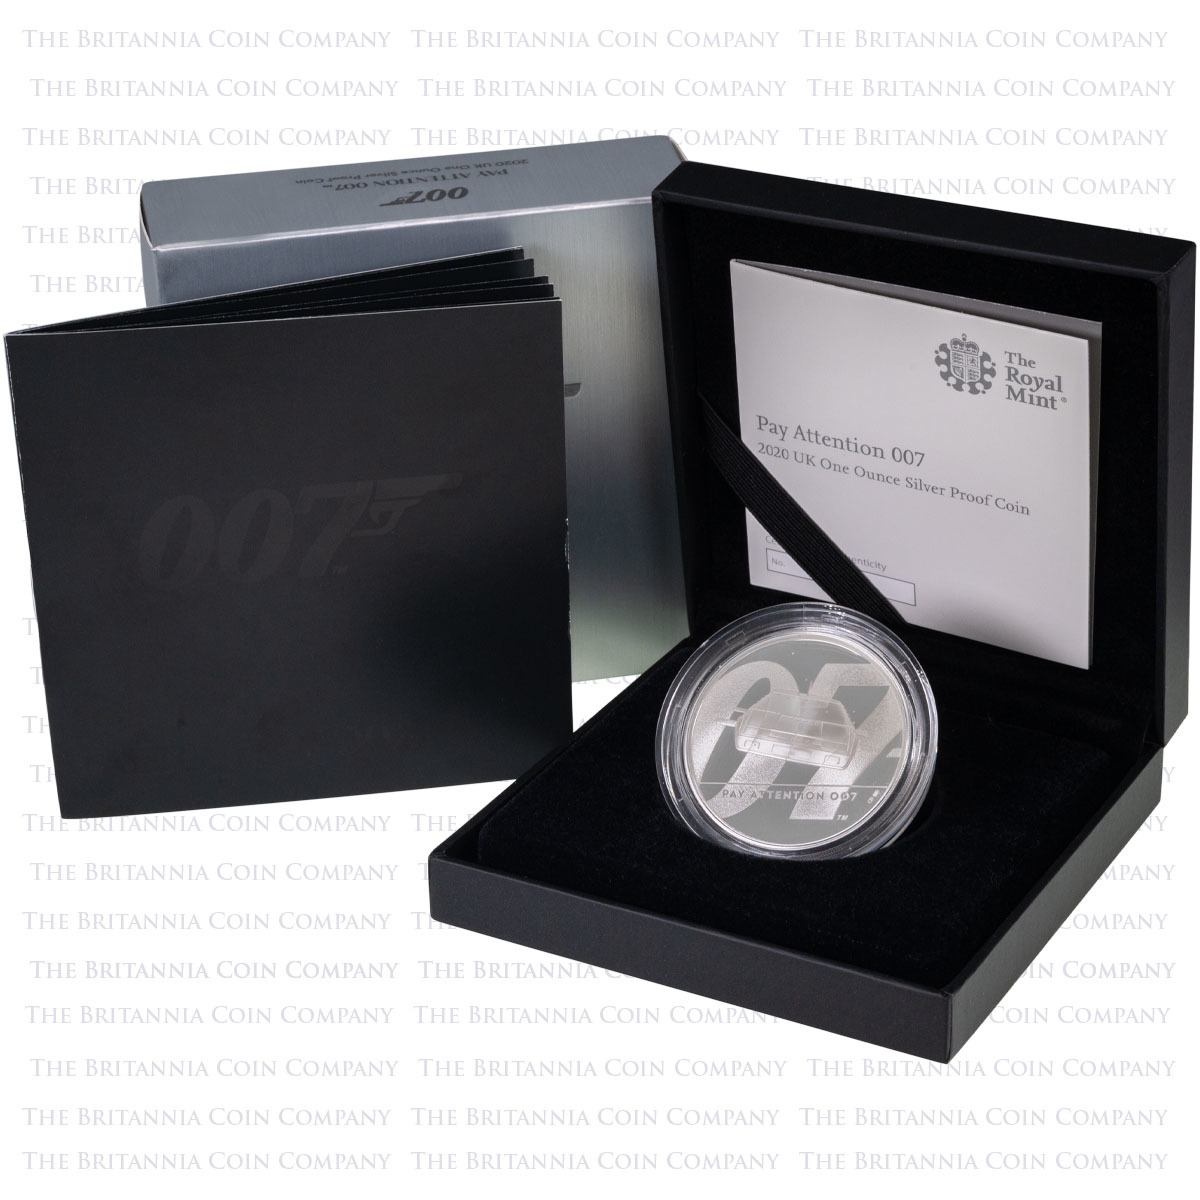 UK20B2SP 2020 Pay Attention James Bond 007 One Ounce Silver Proof Coin Boxed